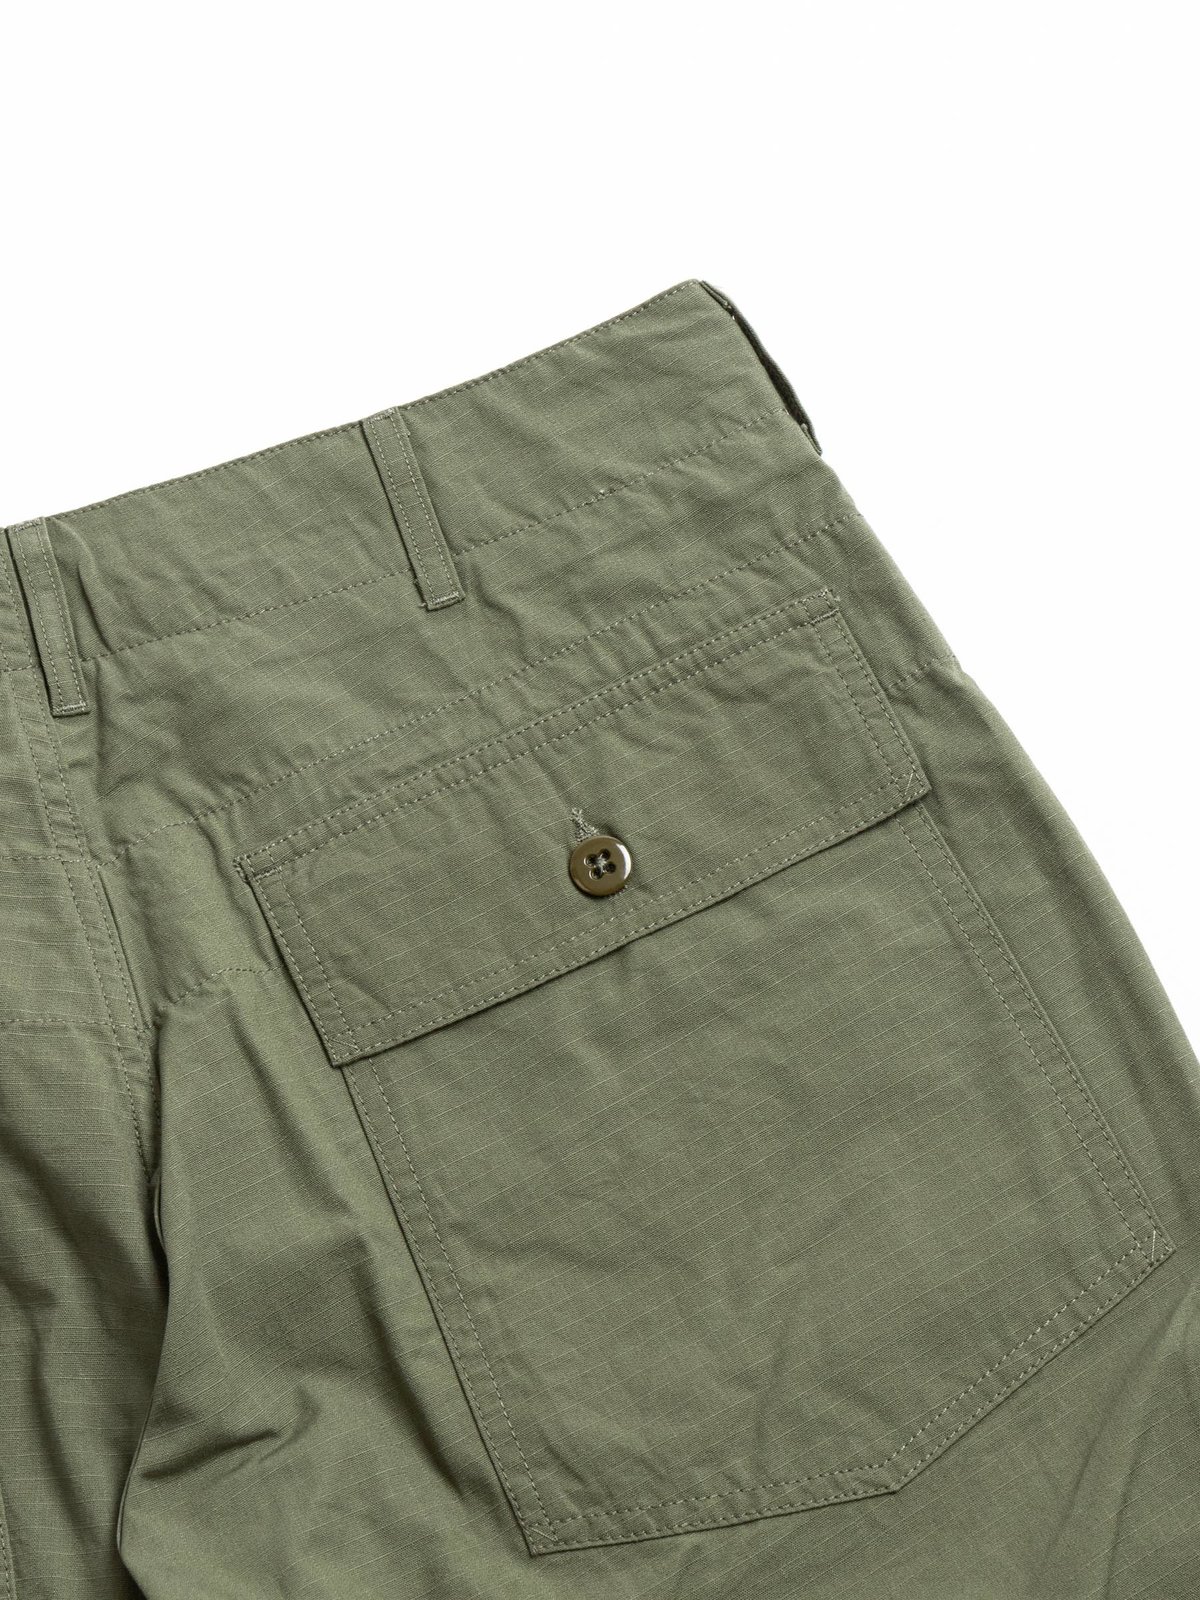 Engineered Garments Fatigue Pant Olive Cotton Ripstop